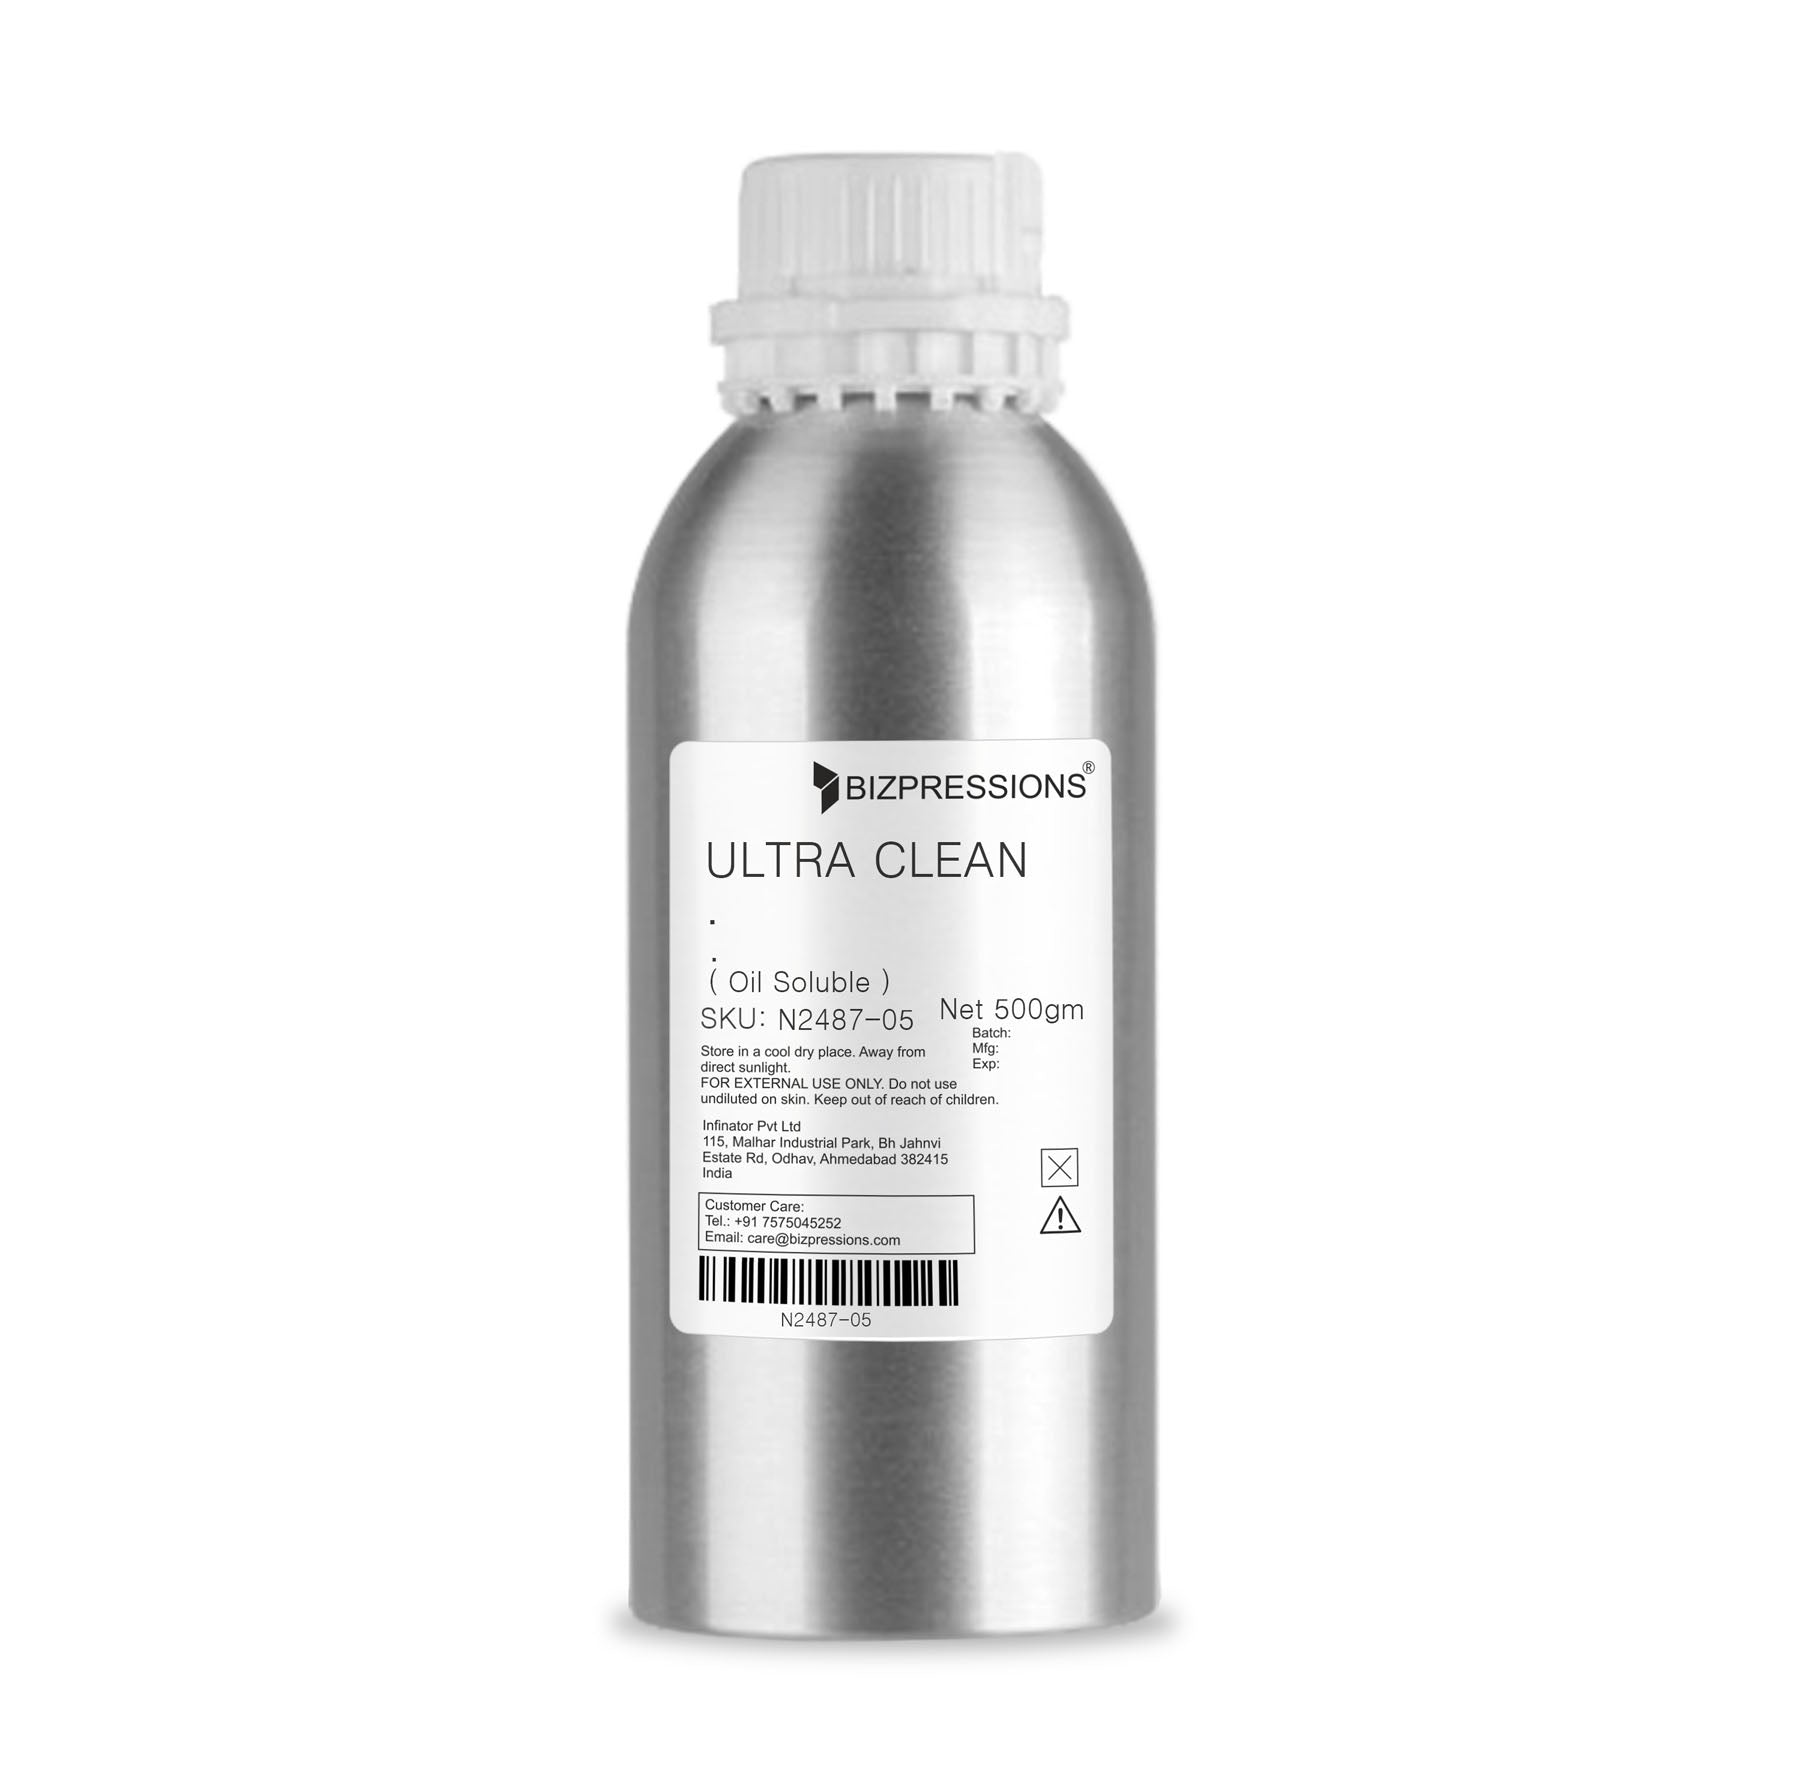 ULTRA CLEAN - Fragrance ( Oil Soluble ) - 500 gm